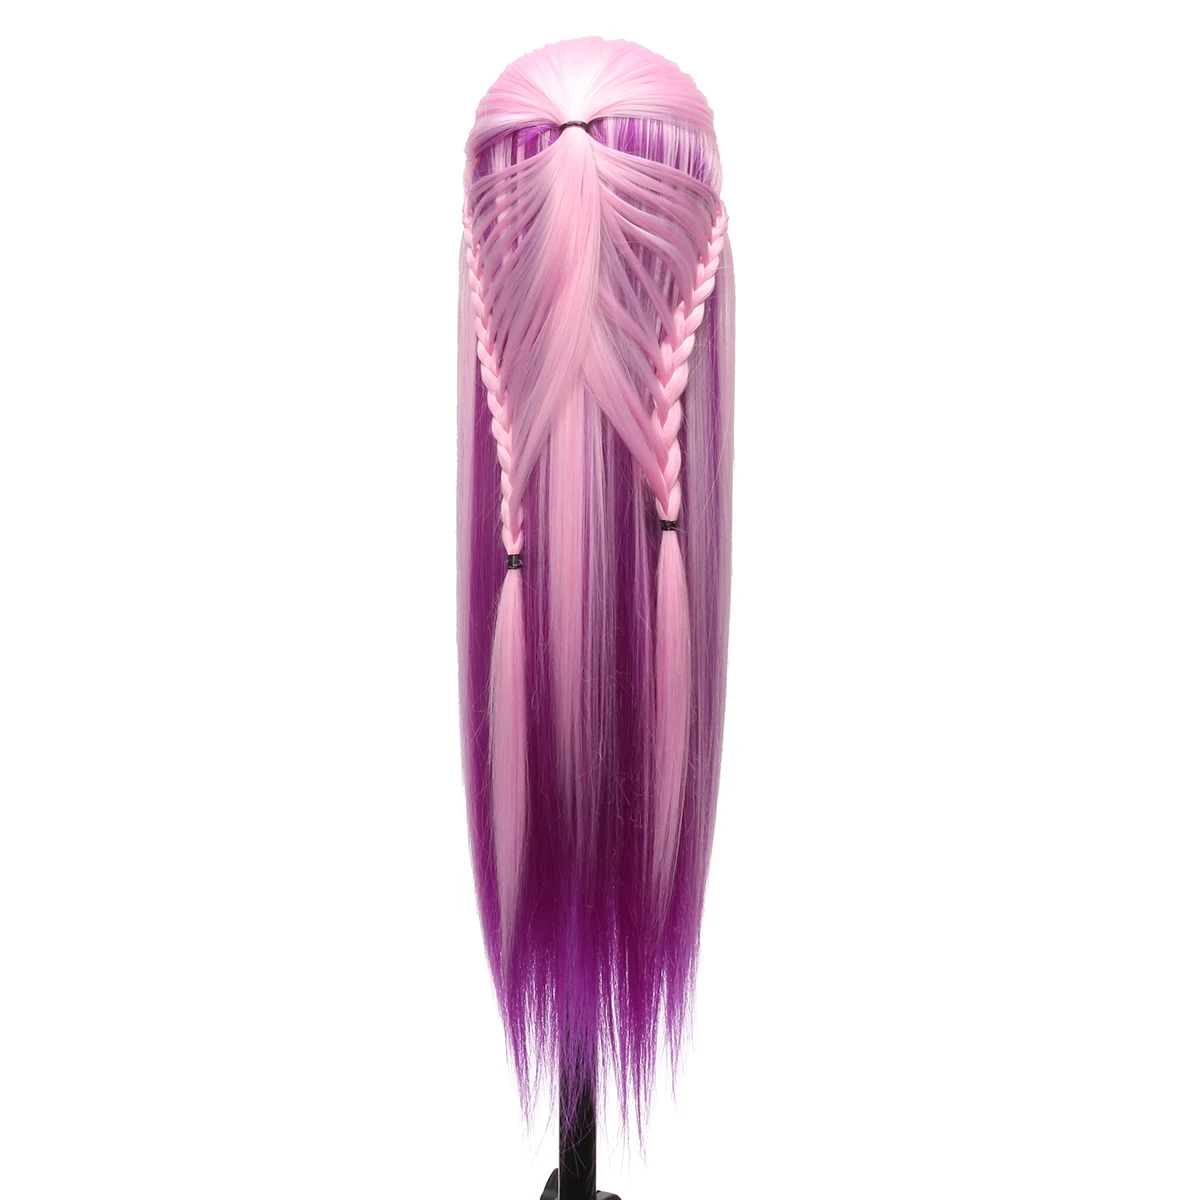 27'' Colorful Practice Training Head Long Hair Mannequin Hairdressing Salon Model